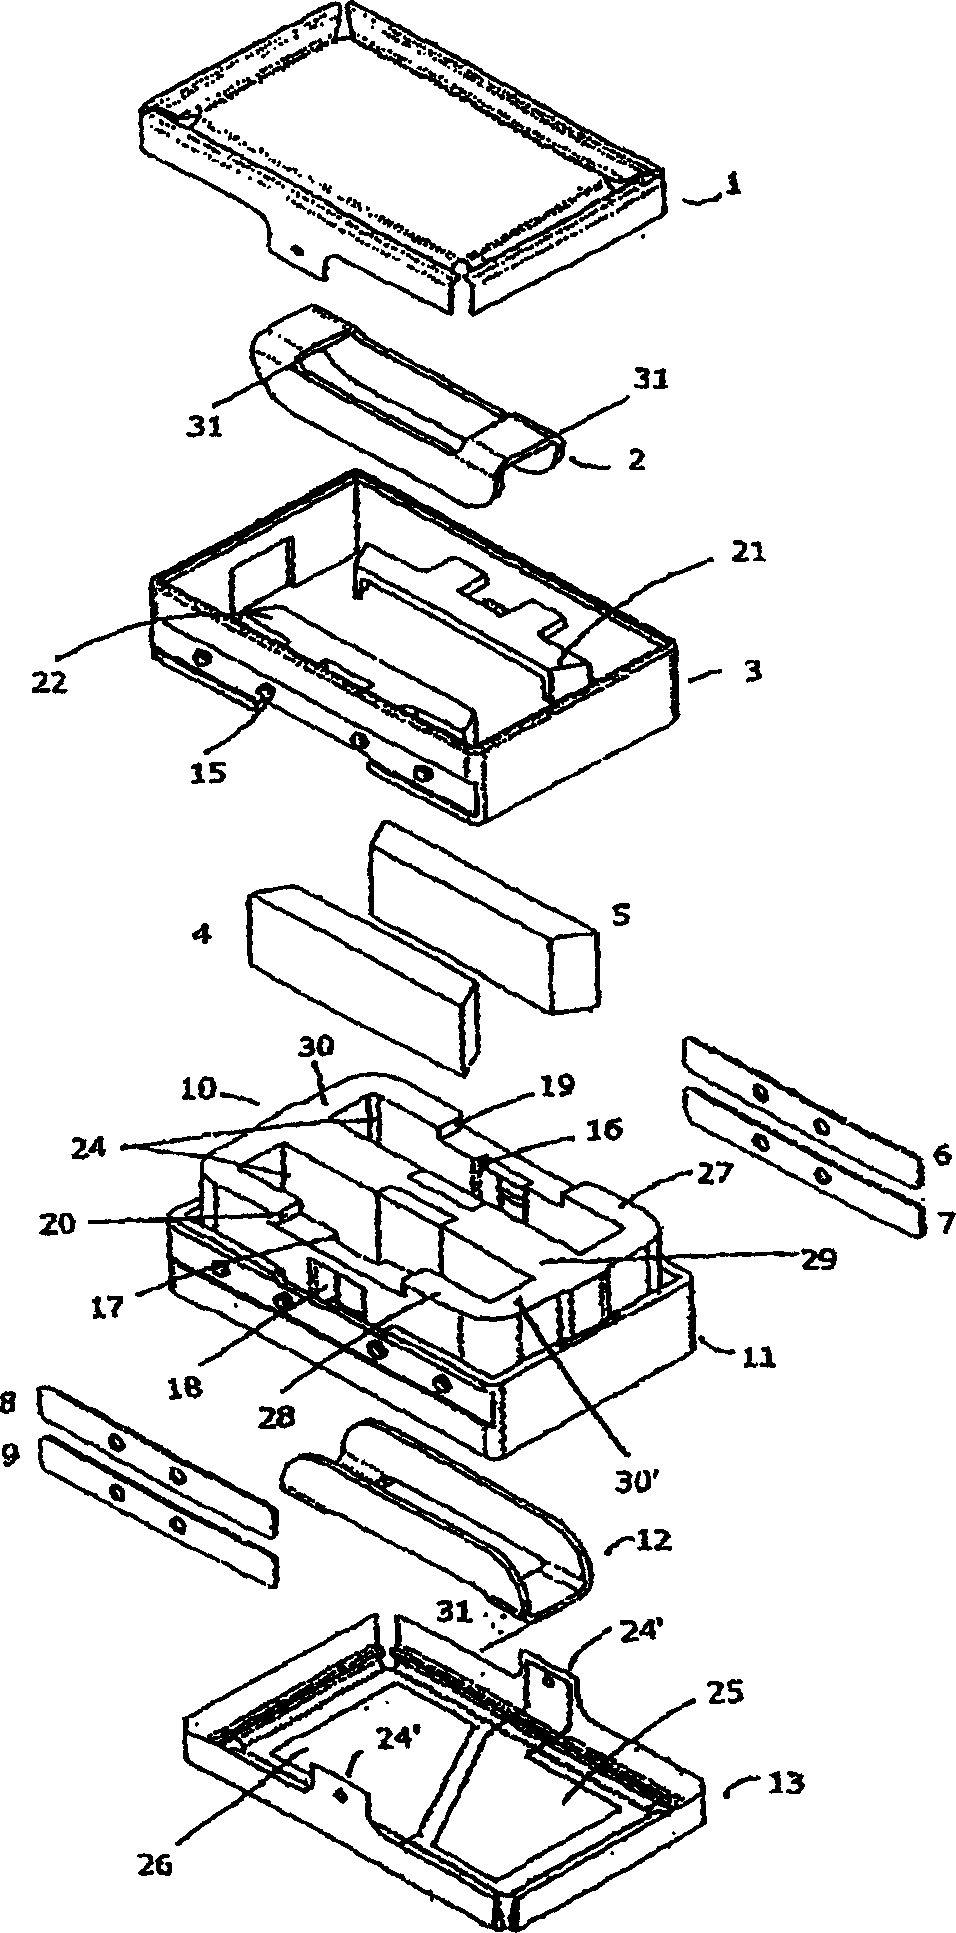 An electro-acoustic transducer with two diaphragms